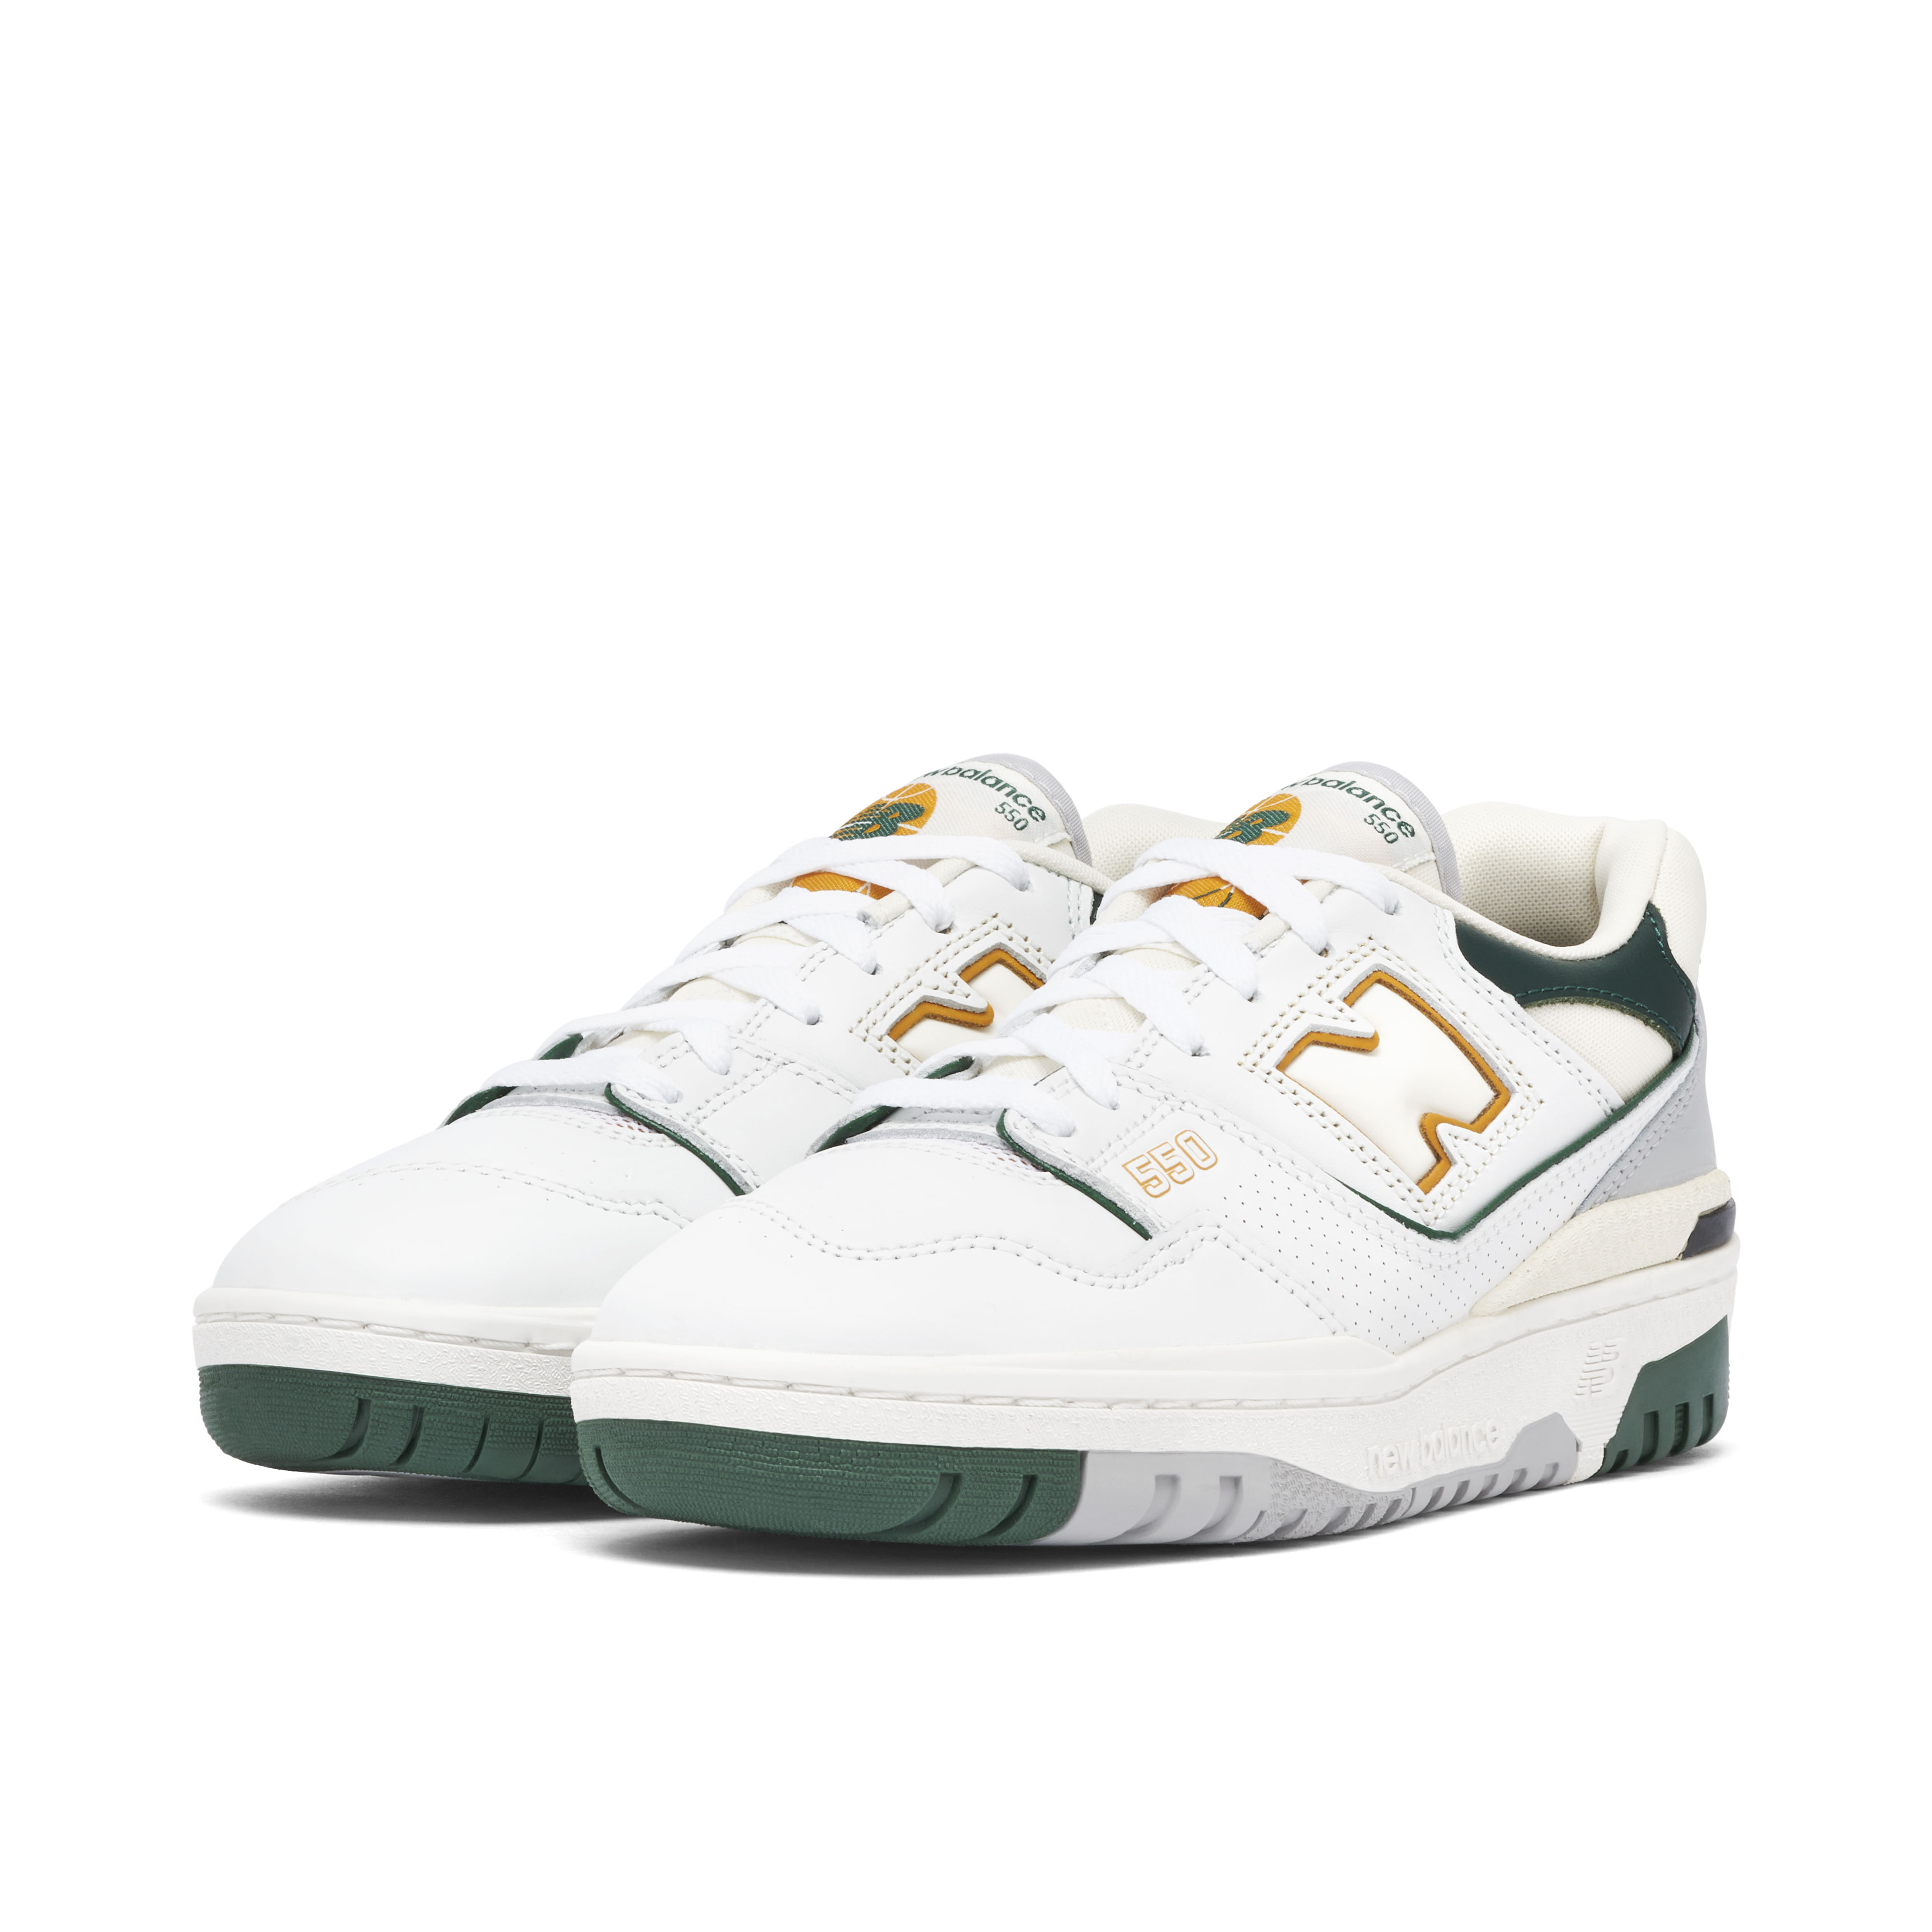 New Balance legends bumbag in off nightwatch green